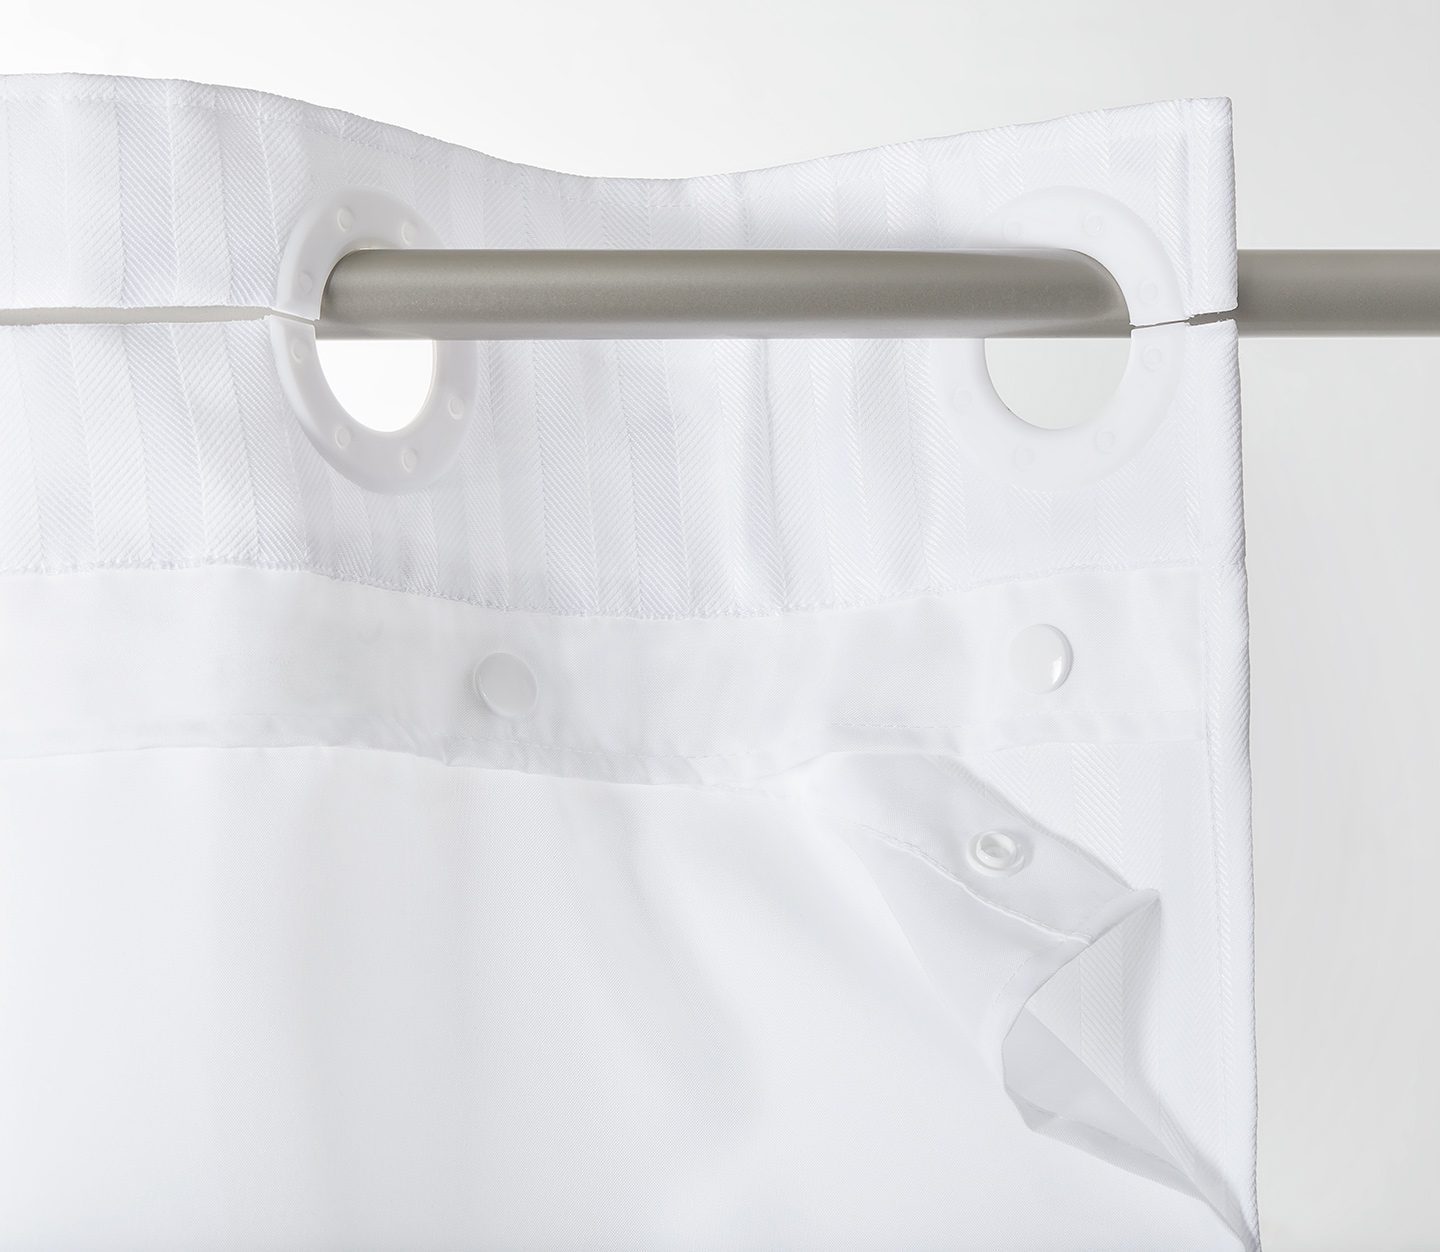 Hook-Free Shower Curtain Liners